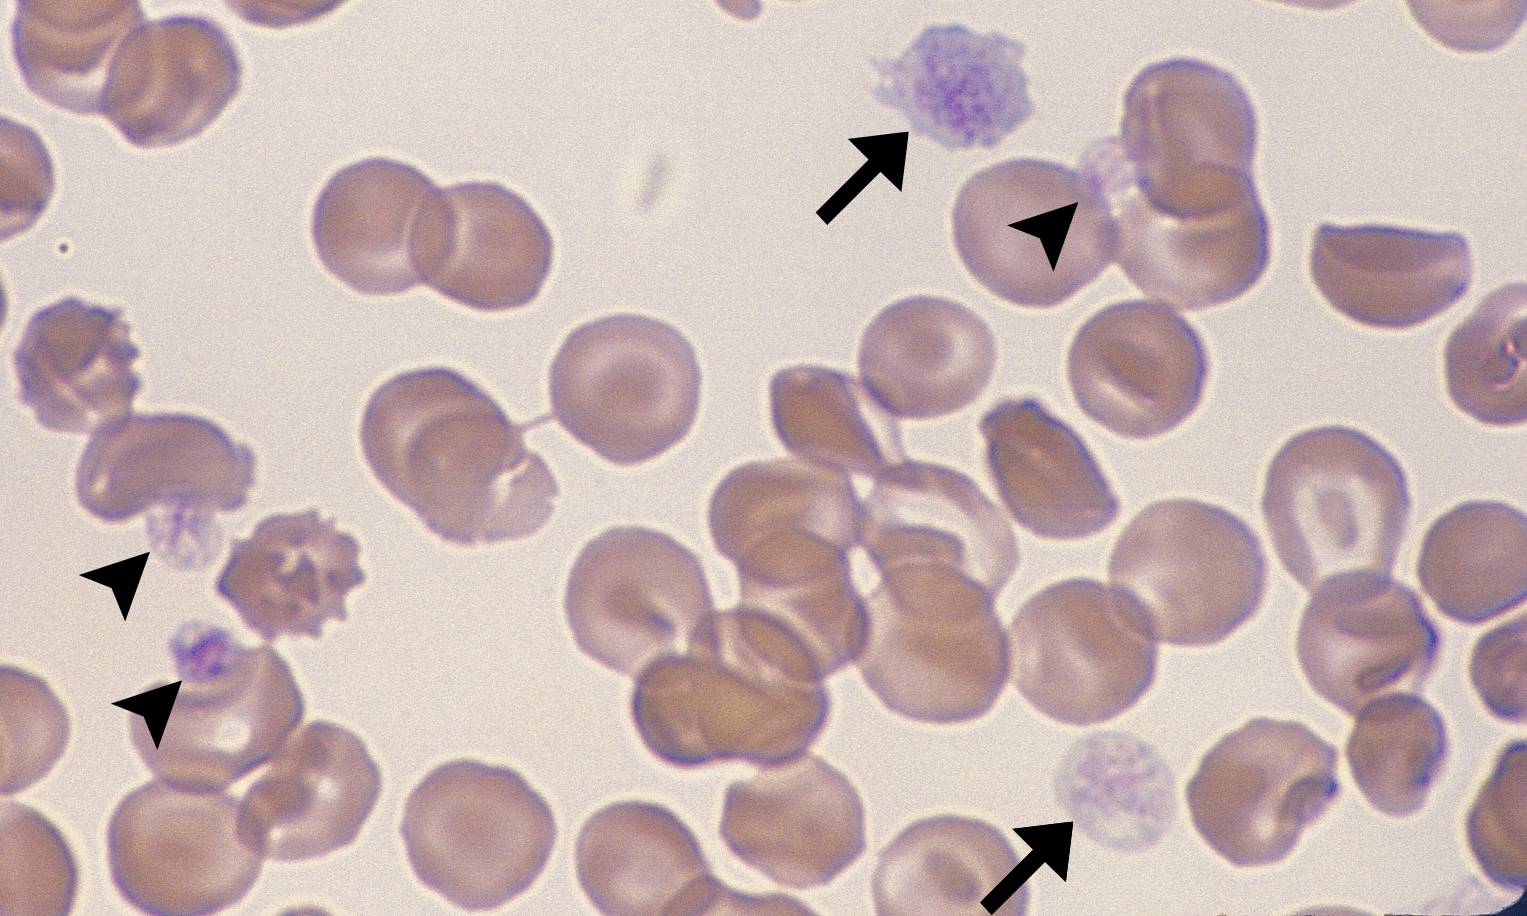 Giant Platelets 4 (Canine 4 - DIC) ARROWS